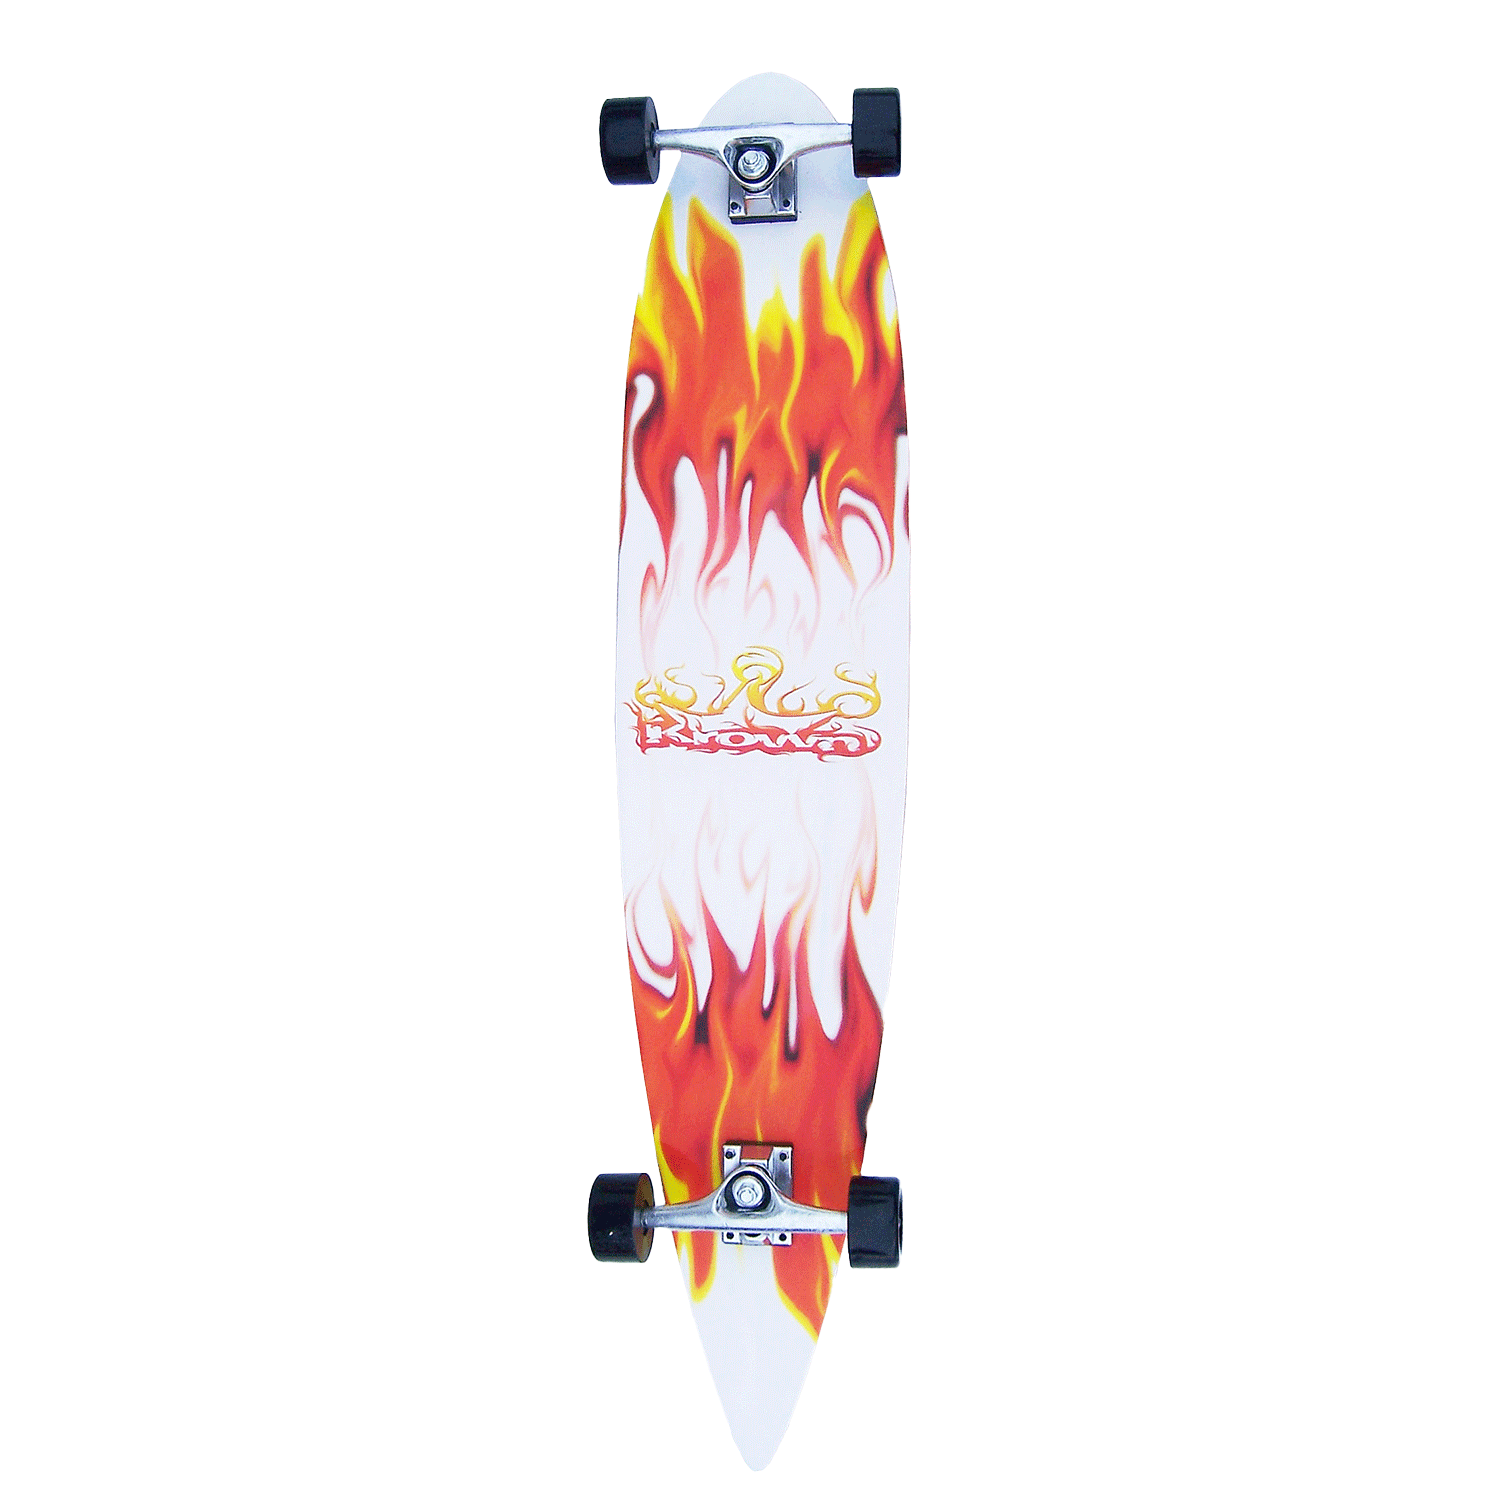 Krown Longboard Complete Pintail Red/White Flame 9in x 43in